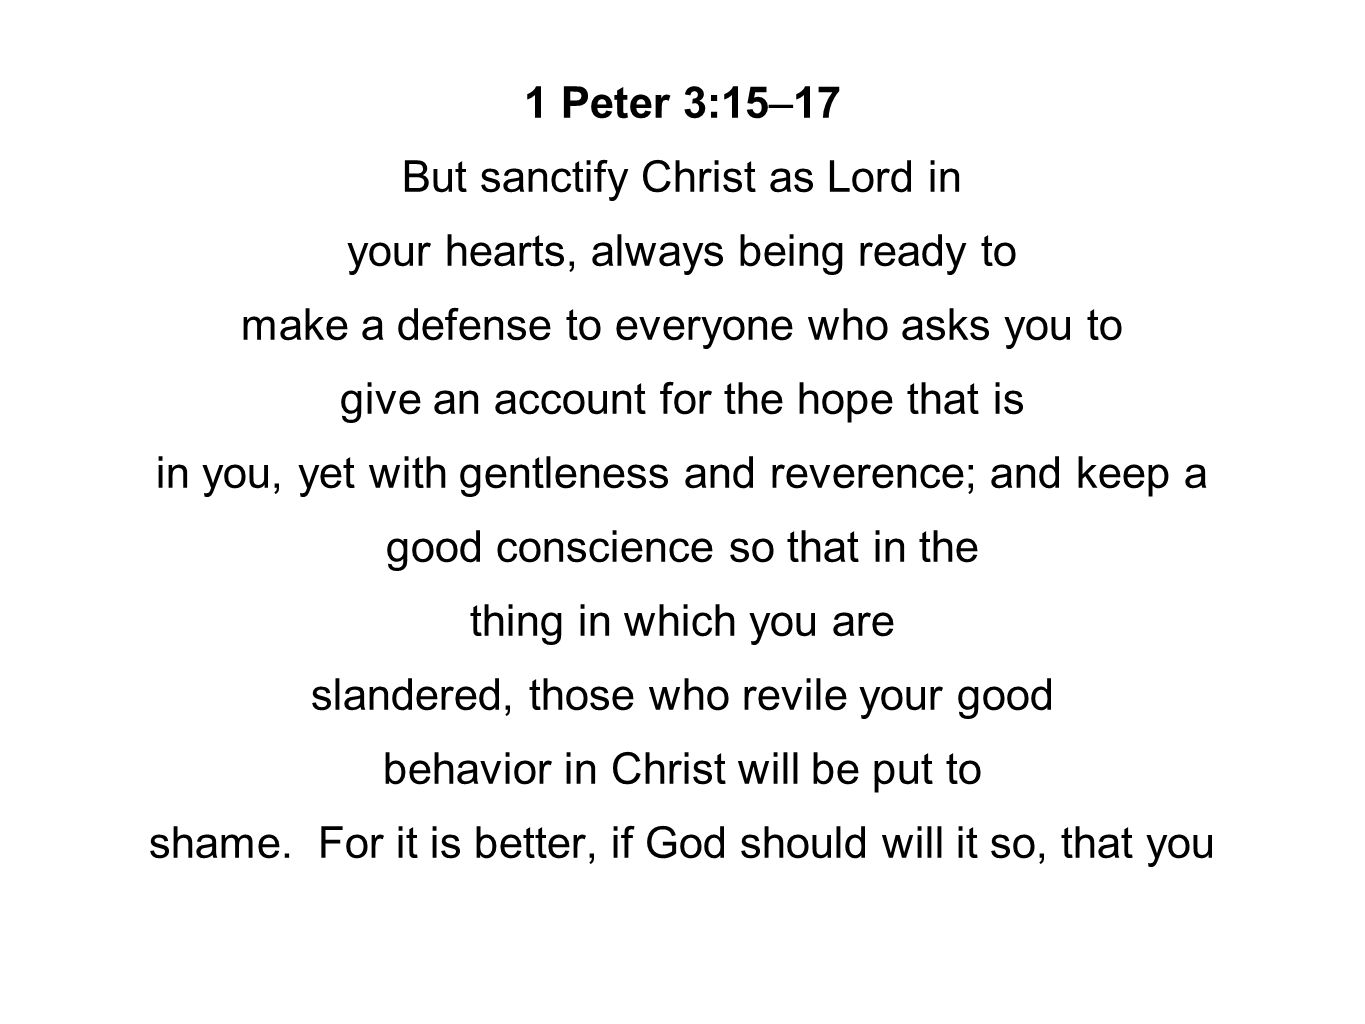 1 Peter 3:15–17 But sanctify Christ as Lord in your hearts, always being ready to make a defense to everyone who asks you to give an account for the hope that is in you, yet with gentleness and reverence; and keep a good conscience so that in the thing in which you are slandered, those who revile your good behavior in Christ will be put to shame.